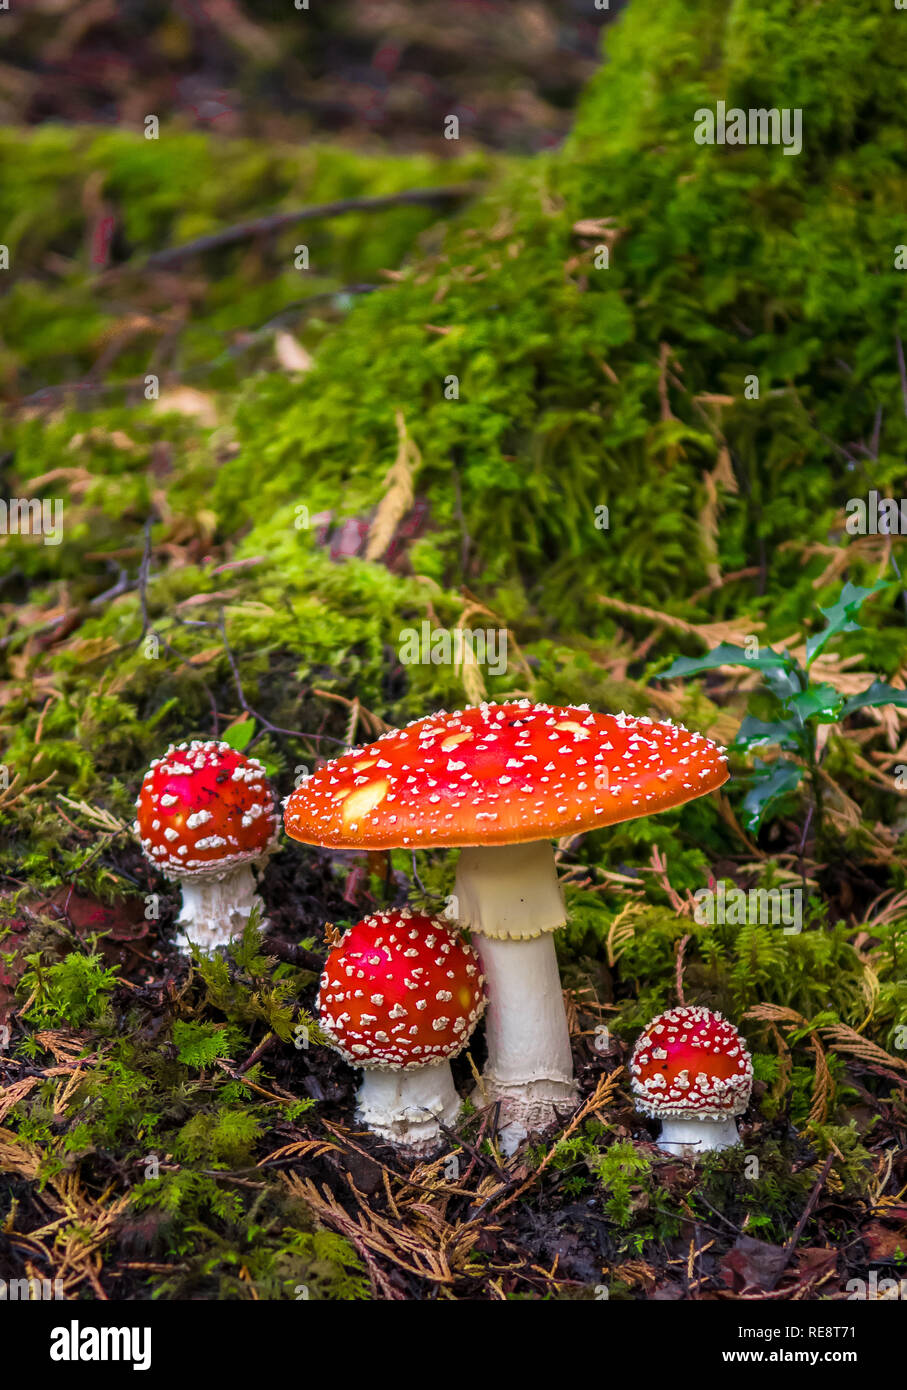 Group Of Fly Agaric With Red Caps On Mossy Forest Ground Stock Photo